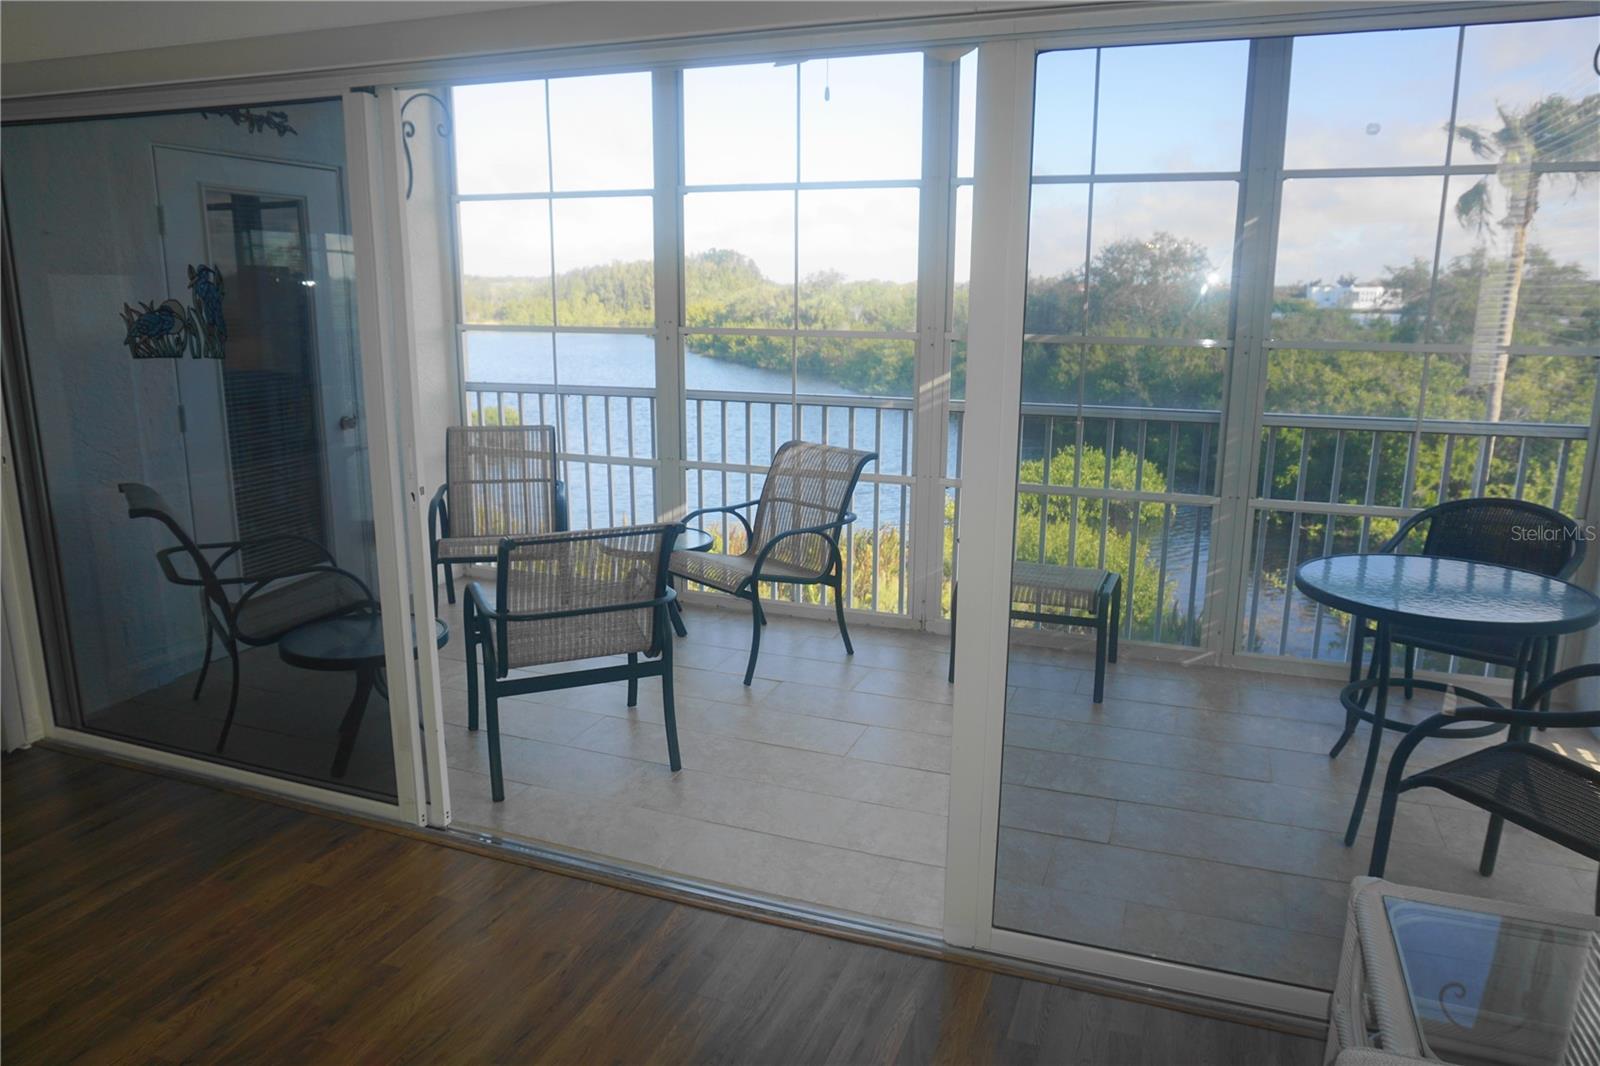 The lanai is enclosed with vinyl windows to keep the rain out & let the breezes in.